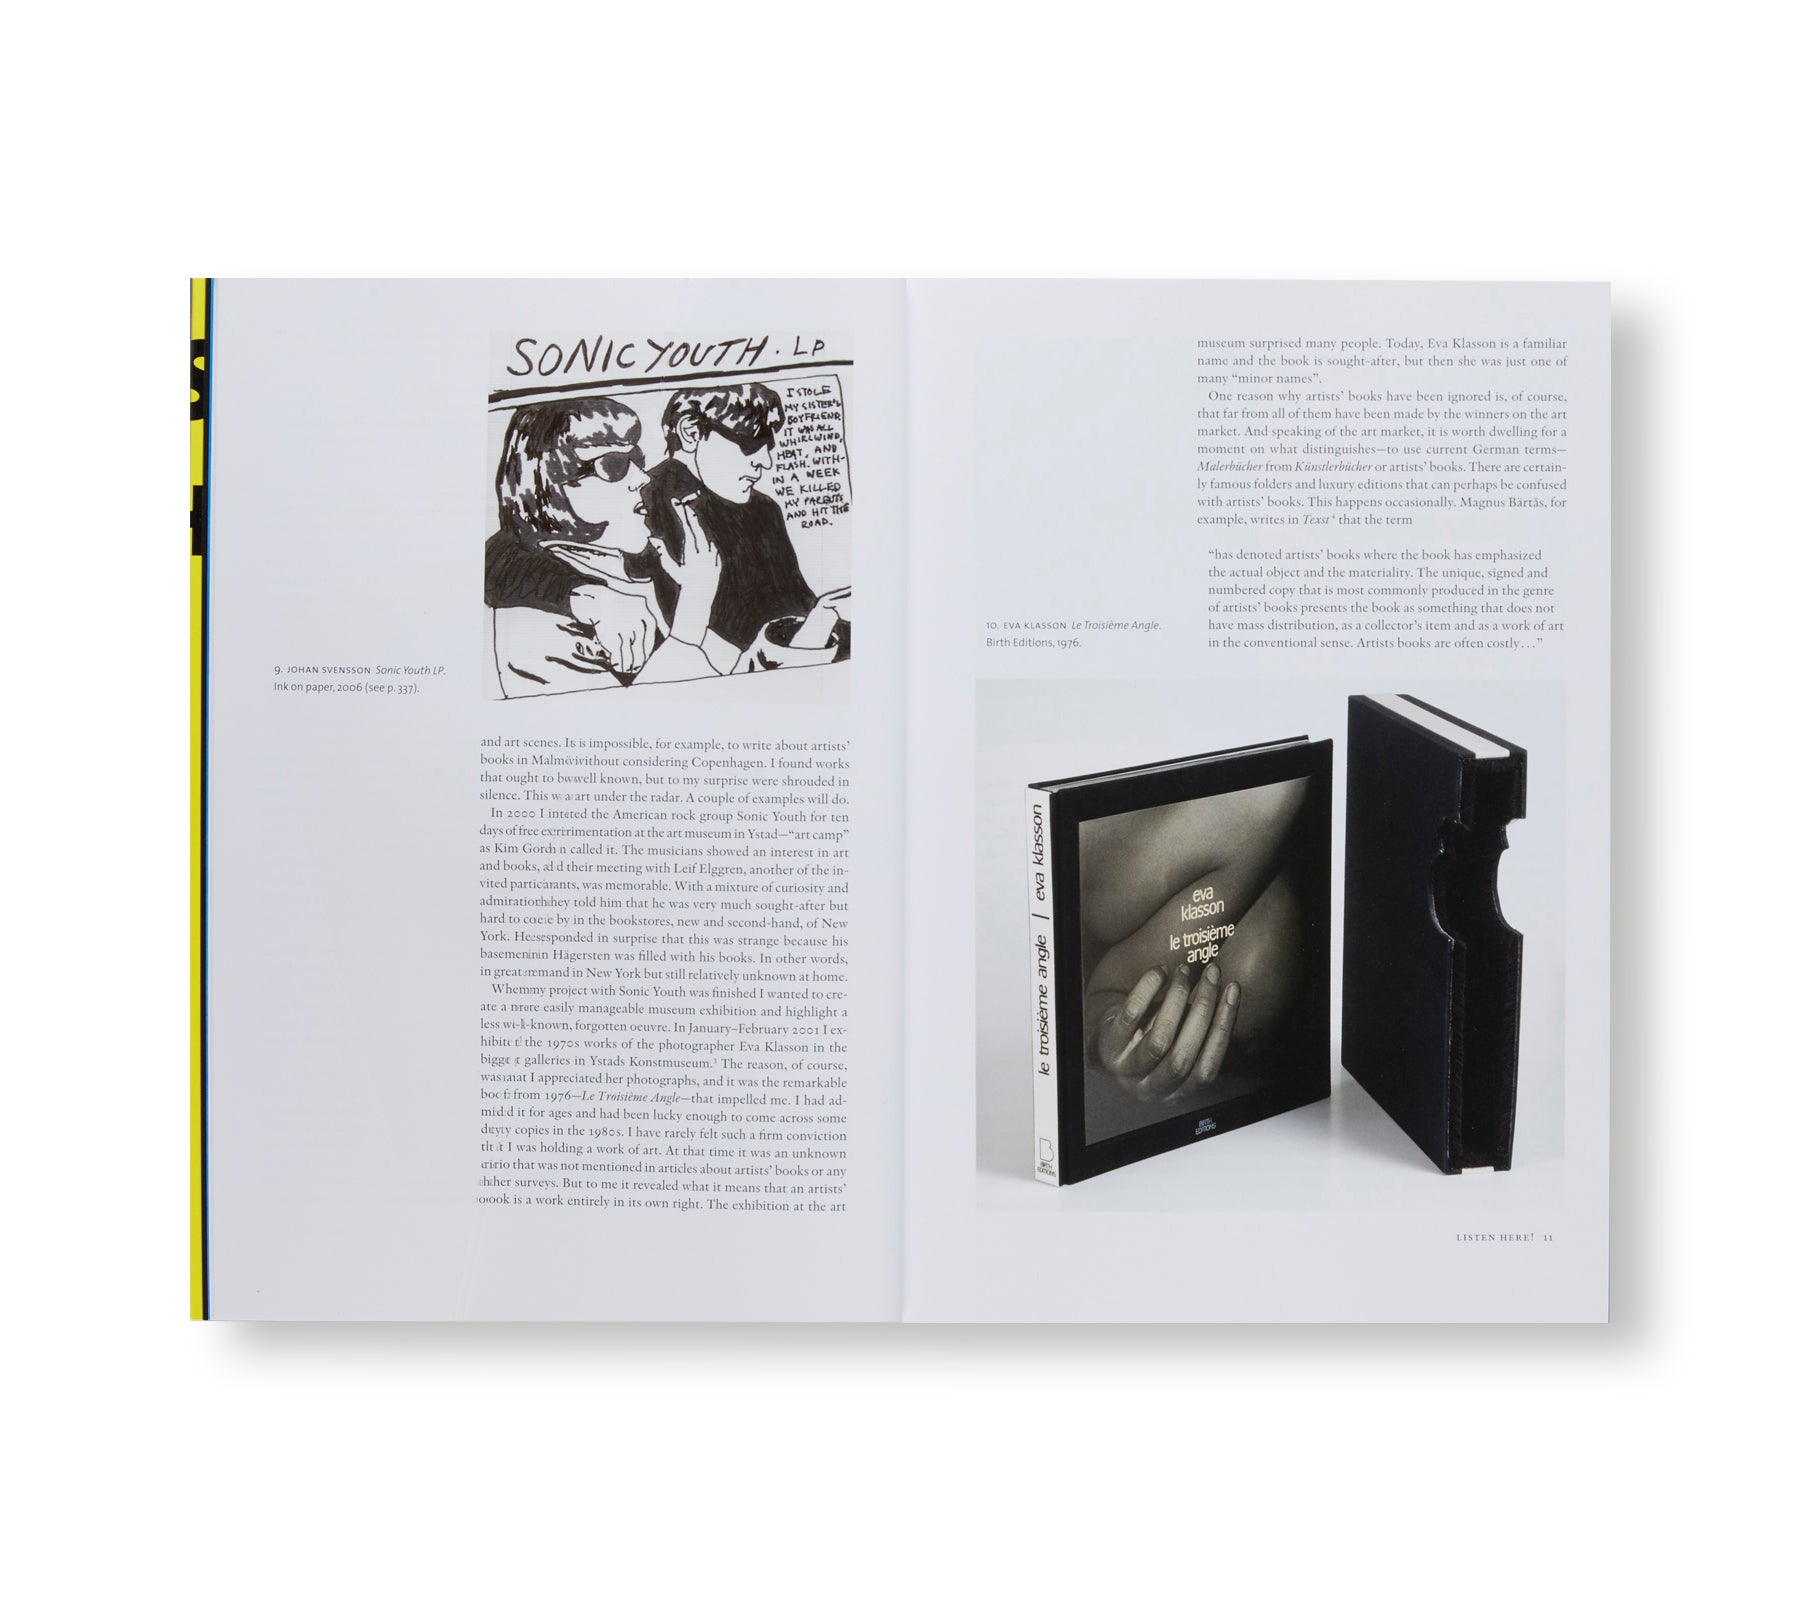 ARTISTS BOOKS FROM A SWEDISH POINT OF VIEW WITH SPECIAL WITH SPECIAL ATTENTION PAID TO THE CONTRIBUTIONS OF DENMARK AND GDR